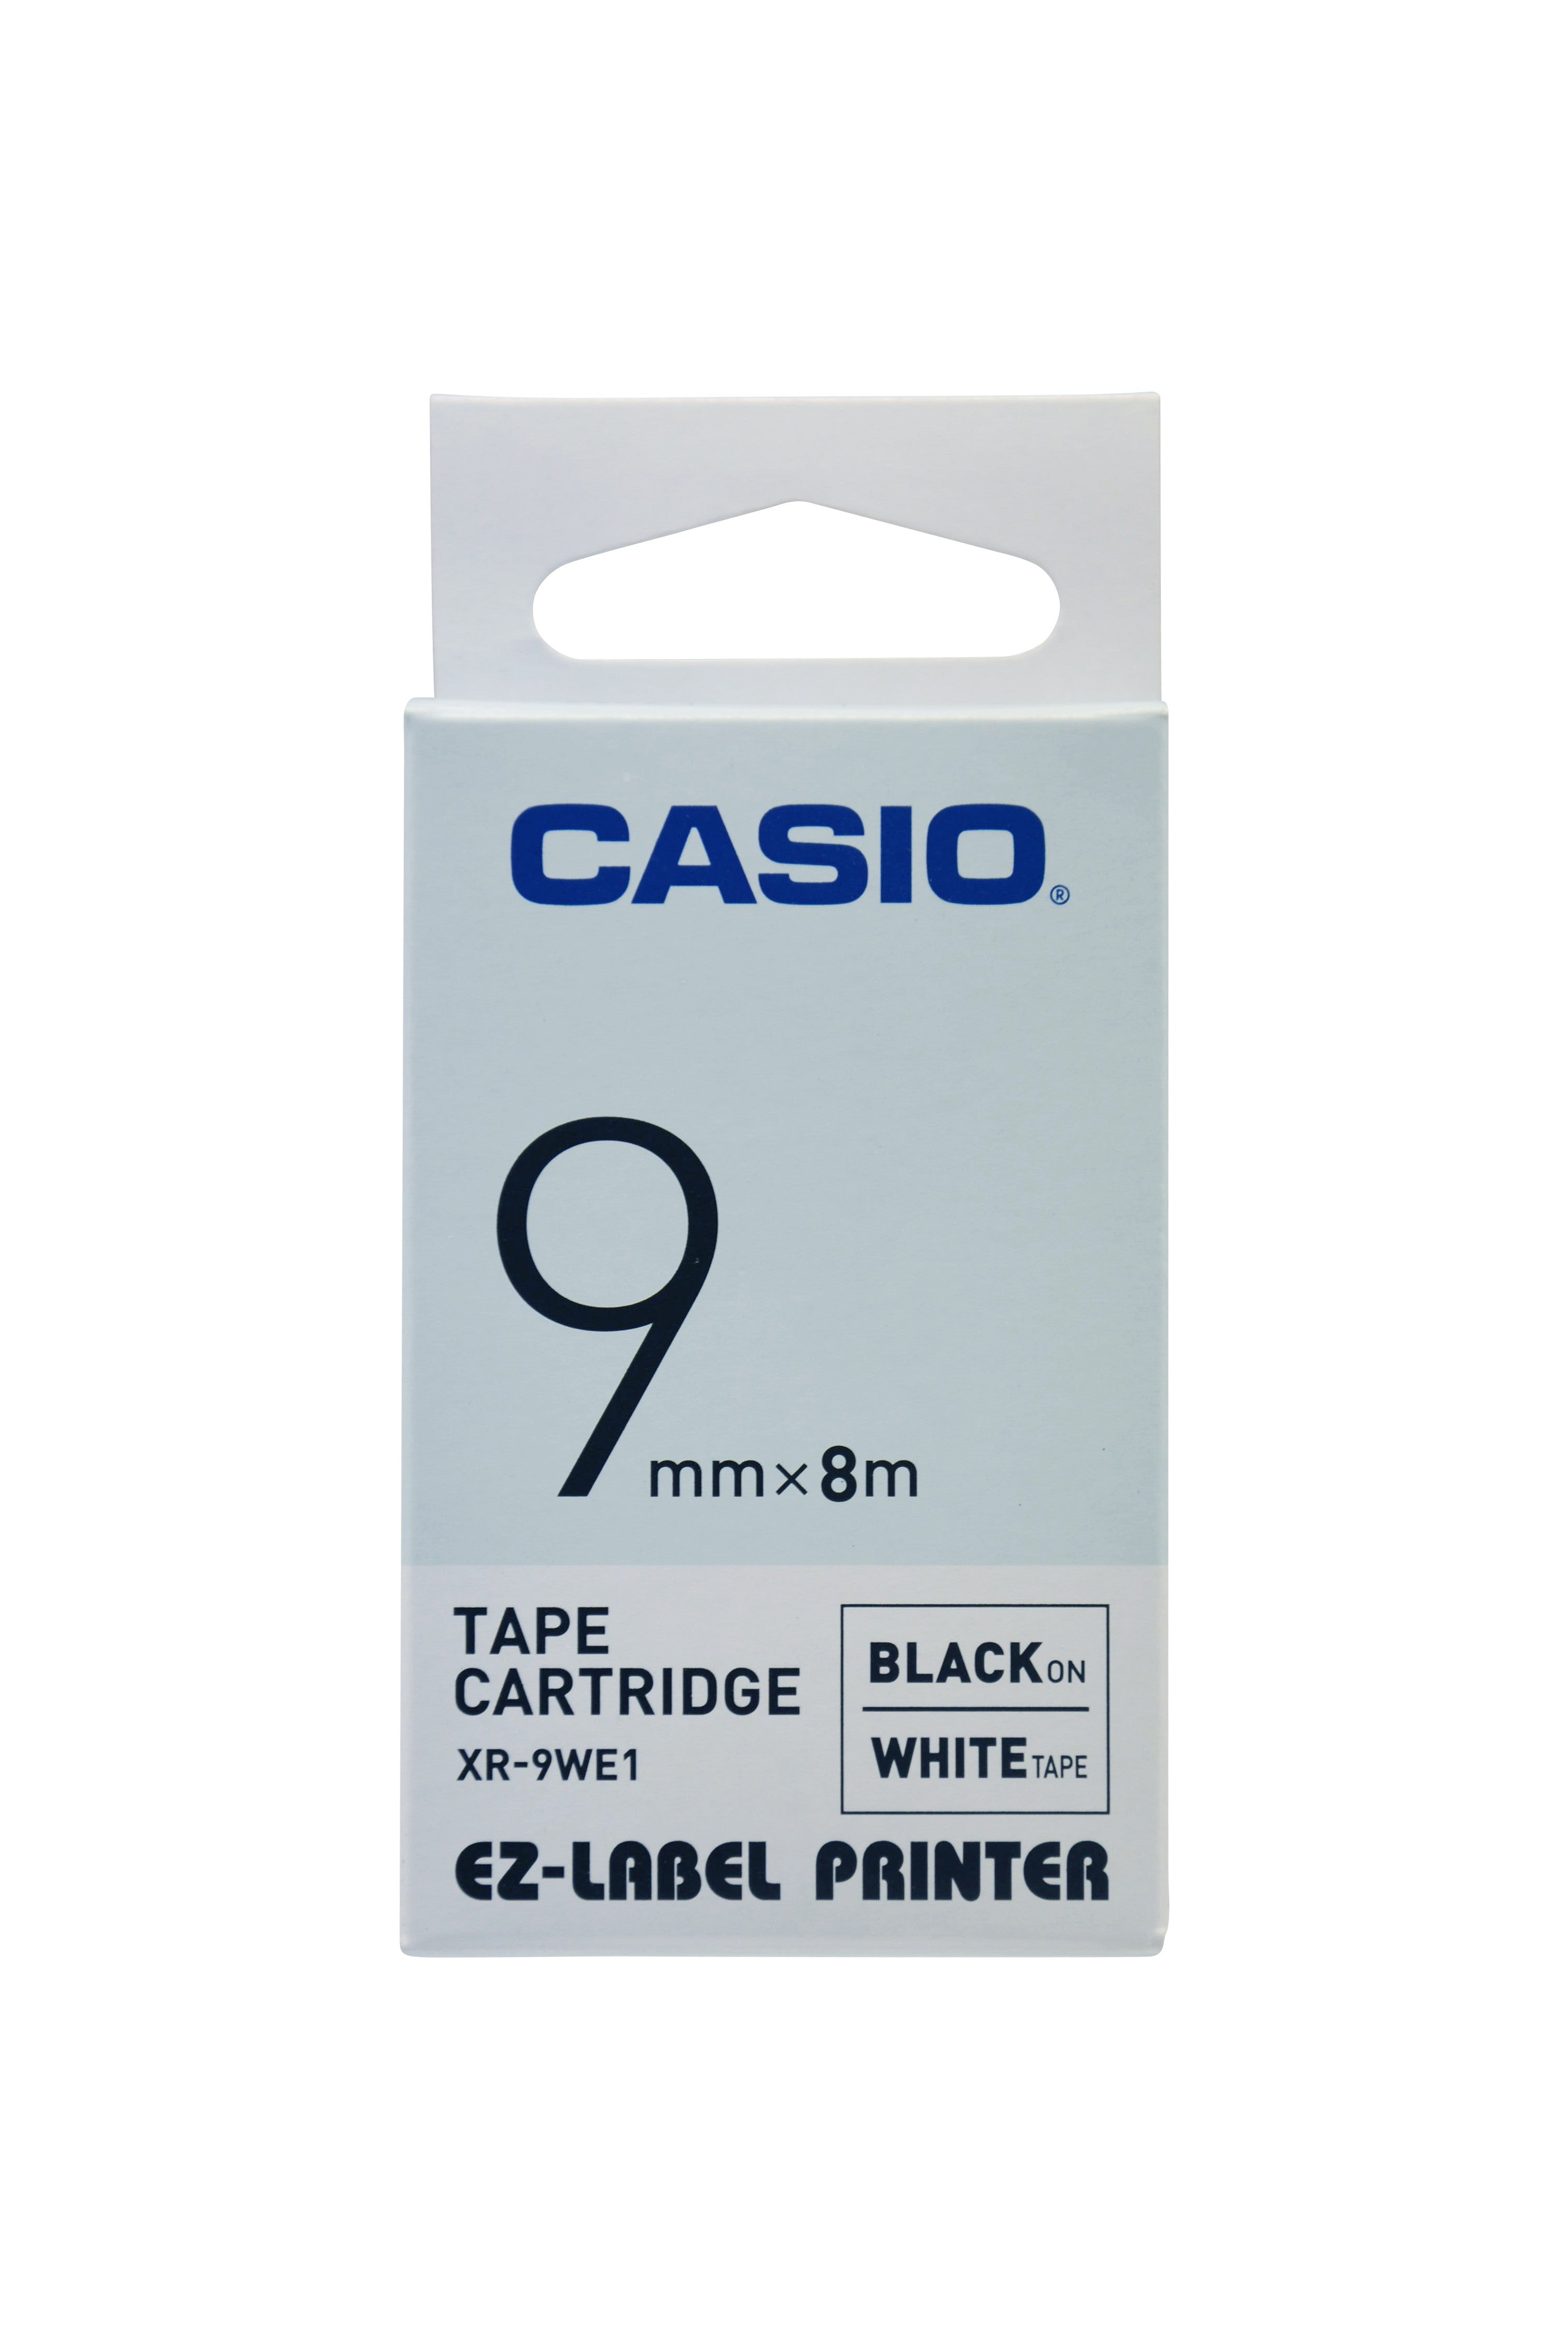 Casio 9mm Black on White Labeling Tape  XR-9WE1 for Casio KL-820 label printer